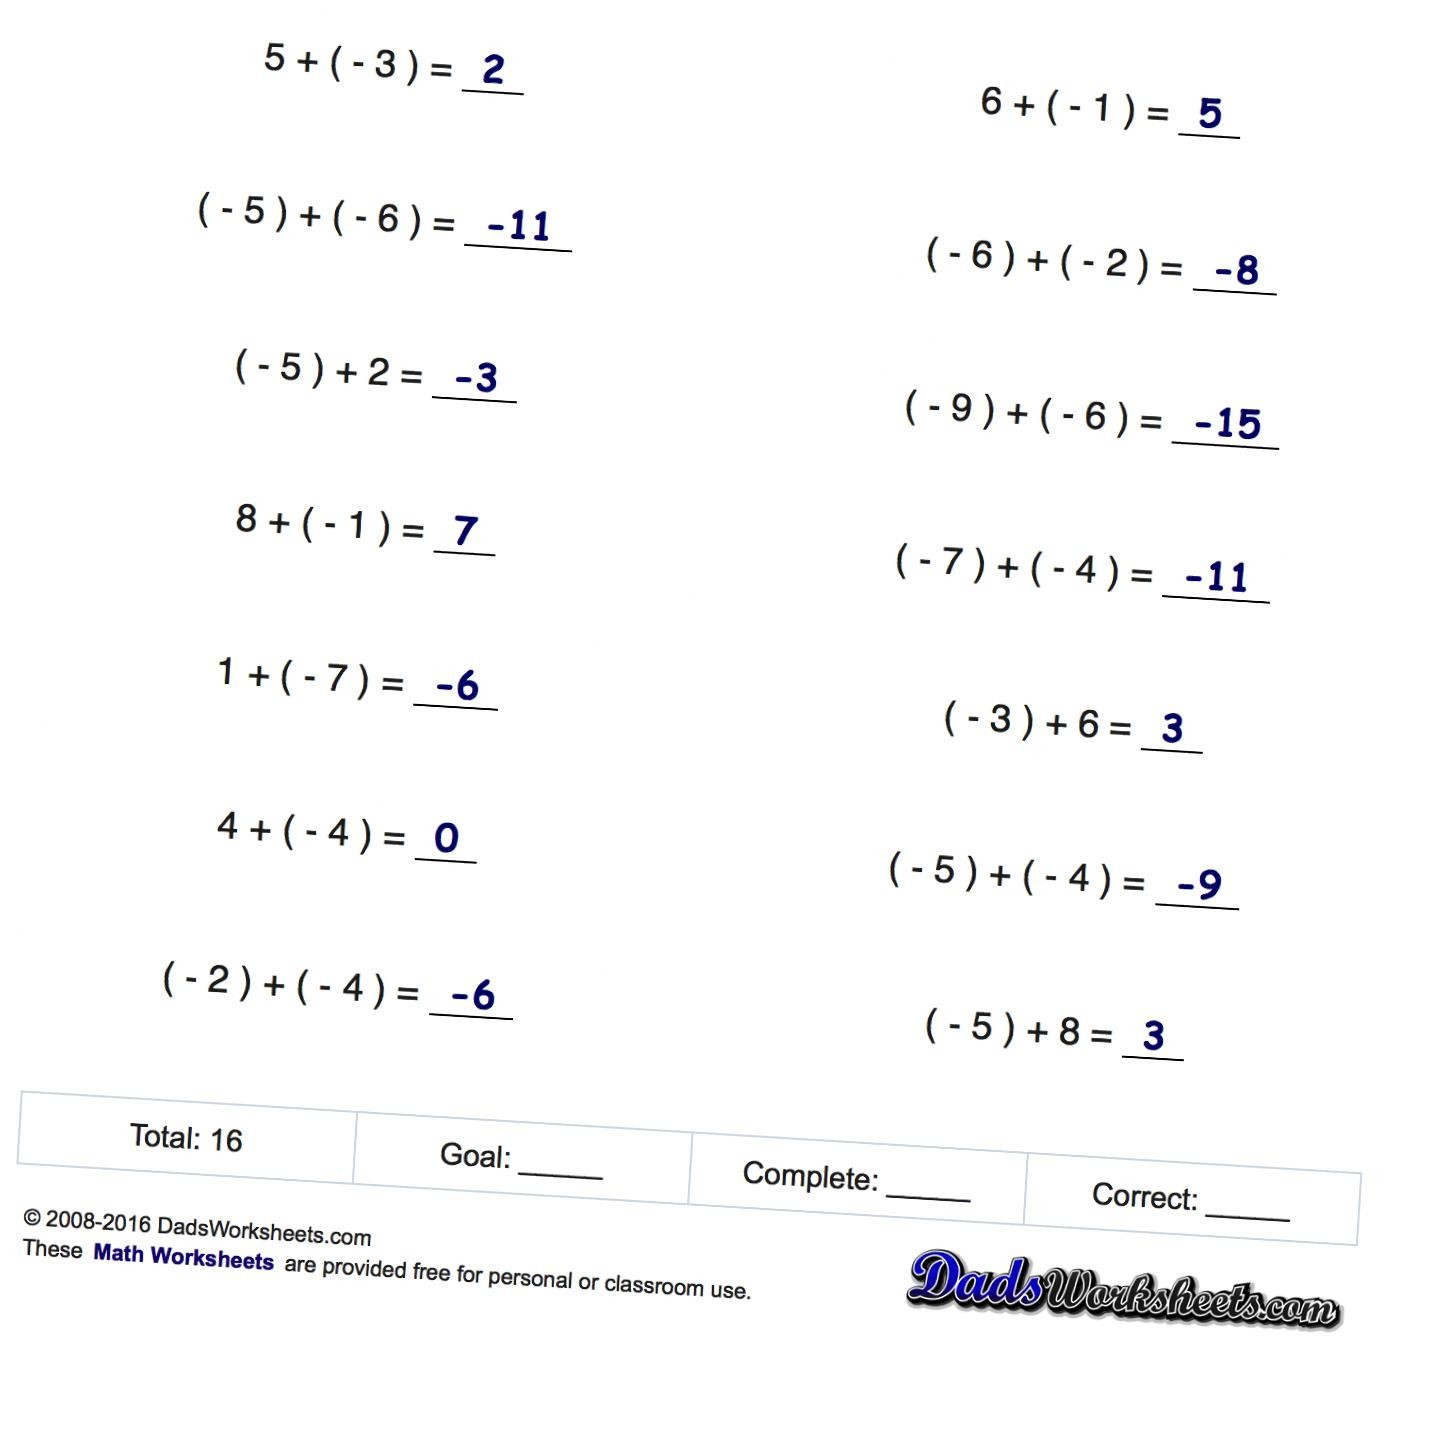 Free Math Worksheets Second Grade 2 Addition Add 2 2 Digit Numbers No Regrouping